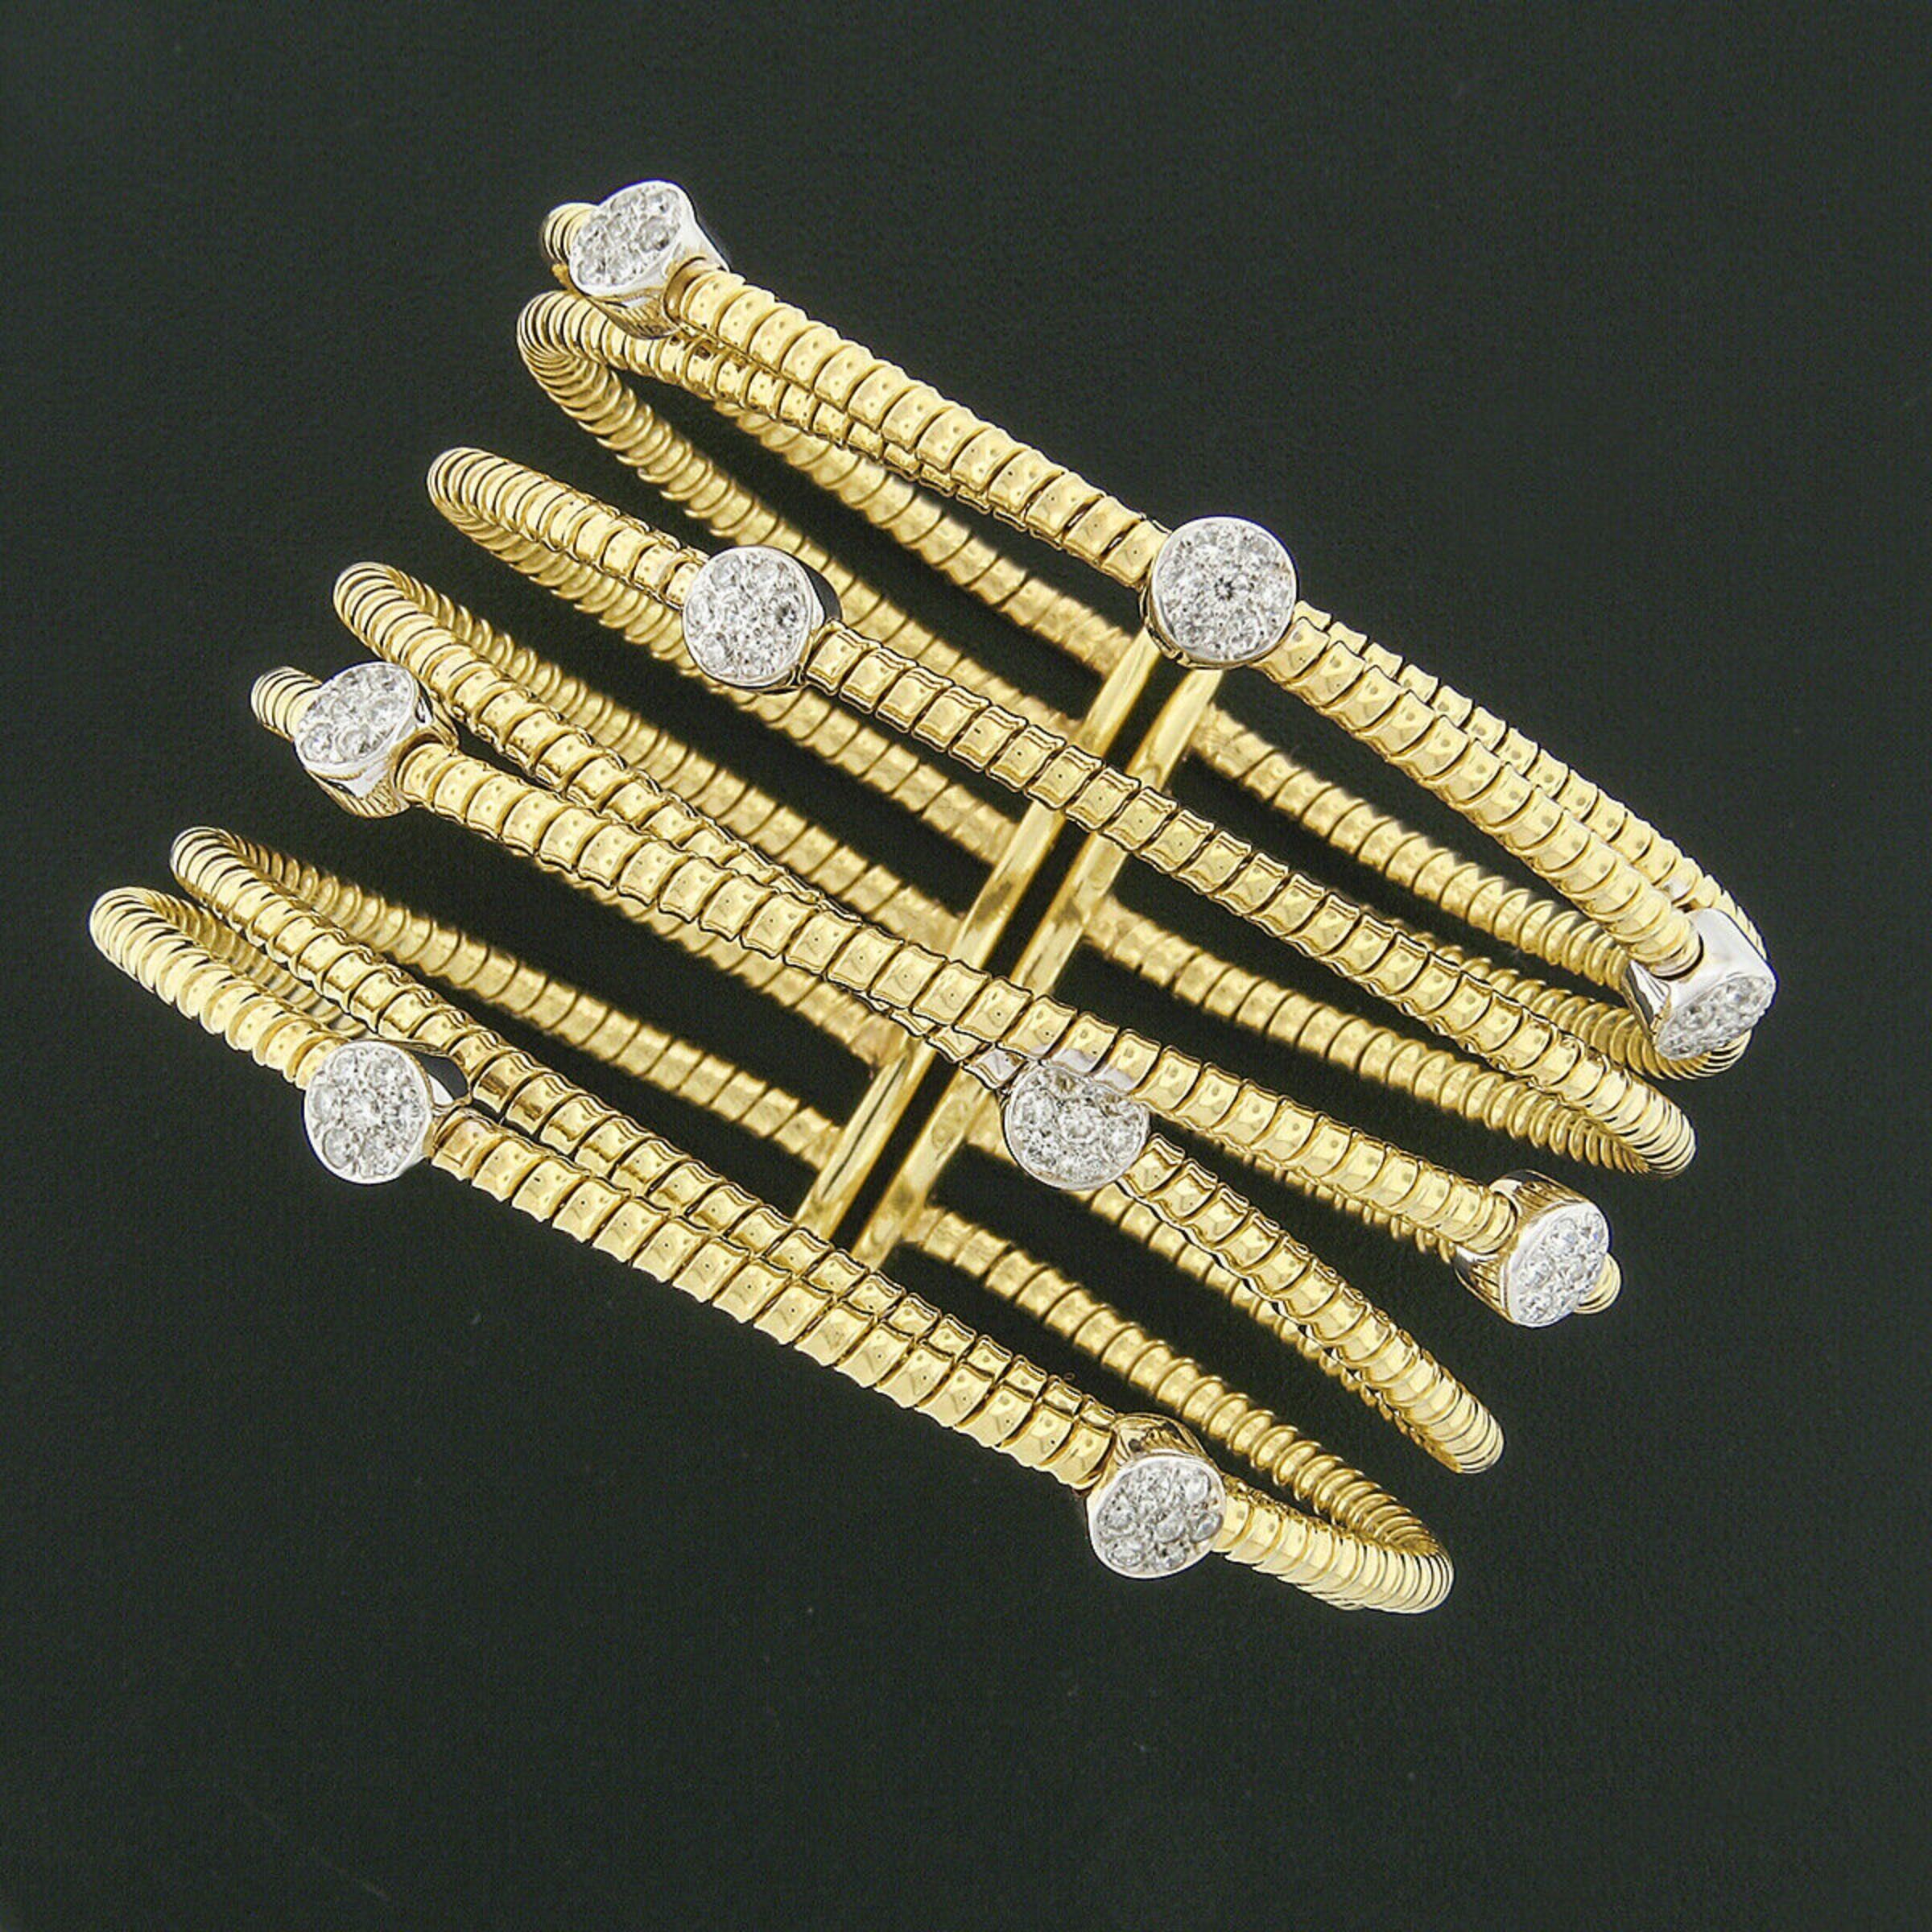 Here we have a very lovely wide open cuff bracelet crafted in solid 18k yellow gold with white gold accents. The wrapped cable crossover design features 63 pave set round brilliant diamond as 9 separate and perfectly placed clusters in solid white